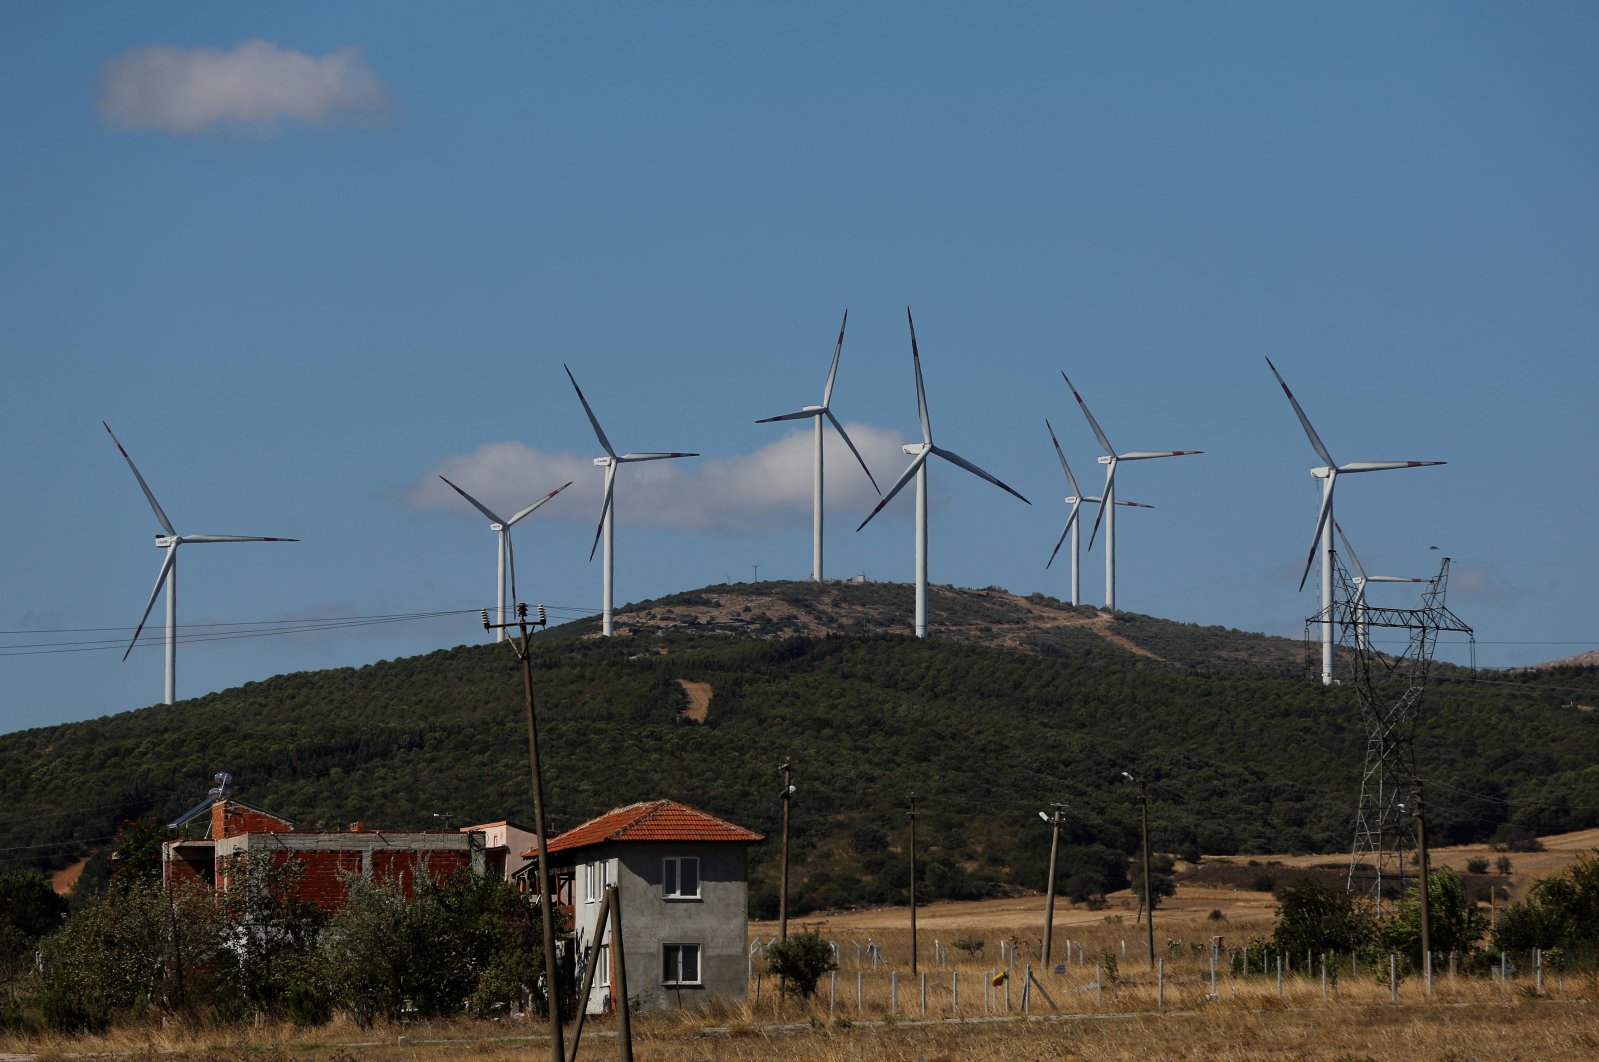 Wind turbines used to generate electricity are seen near the town of Susurluk in Balıkesir province, Turkey, Aug. 31, 2017. (Reuters Photo)